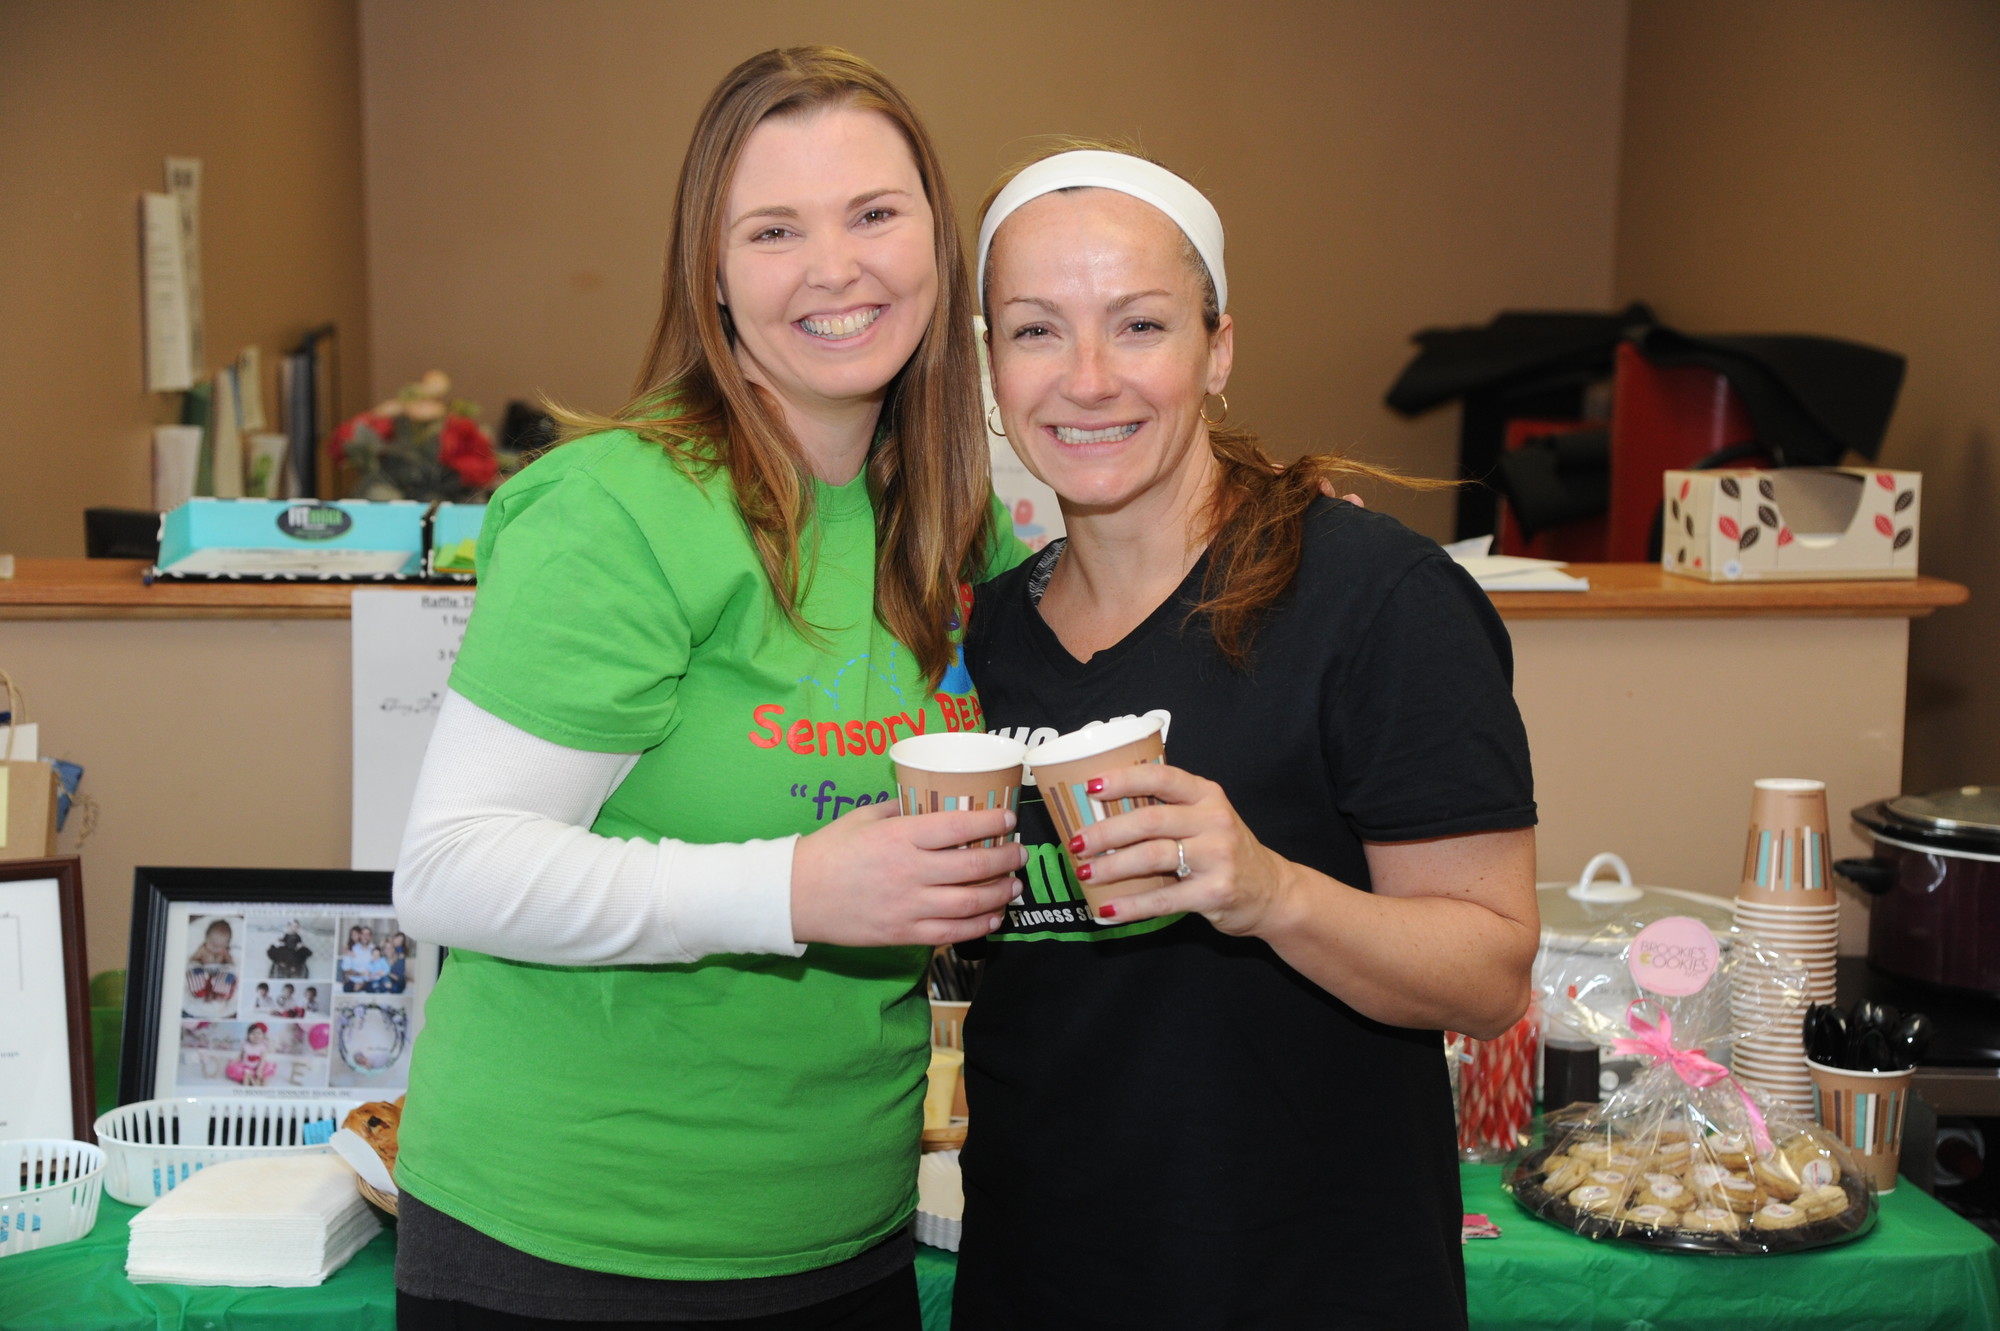 Rachel Roslow, left, co-founder of Sensory Beans, and FITmixx owner Shannon Palagiano enjoyed a cup of hot chocolate at the nonprofit organization’s Feb. 28 fundraiser.